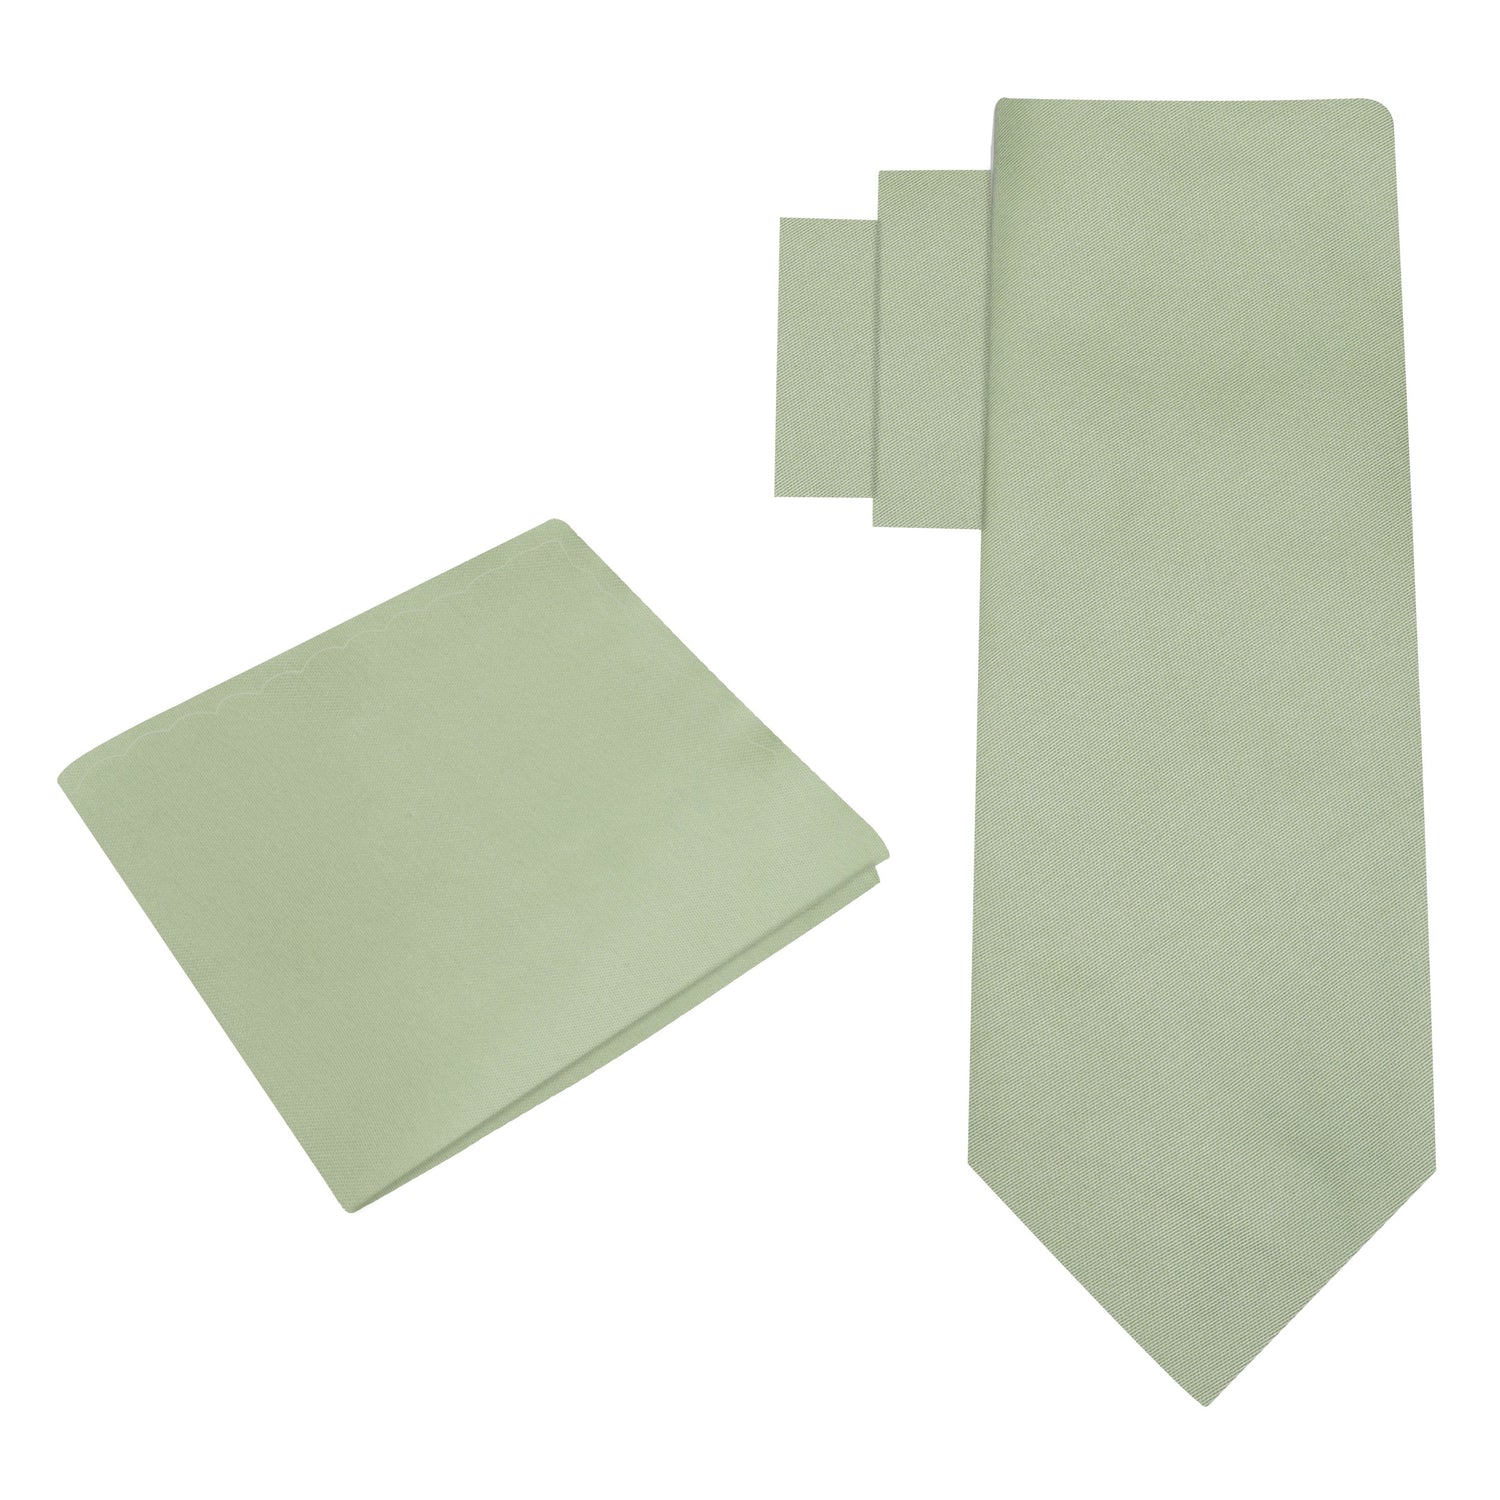 Alt View: Solid Glossy Laurel Green Silk Necktie and Pocket Square